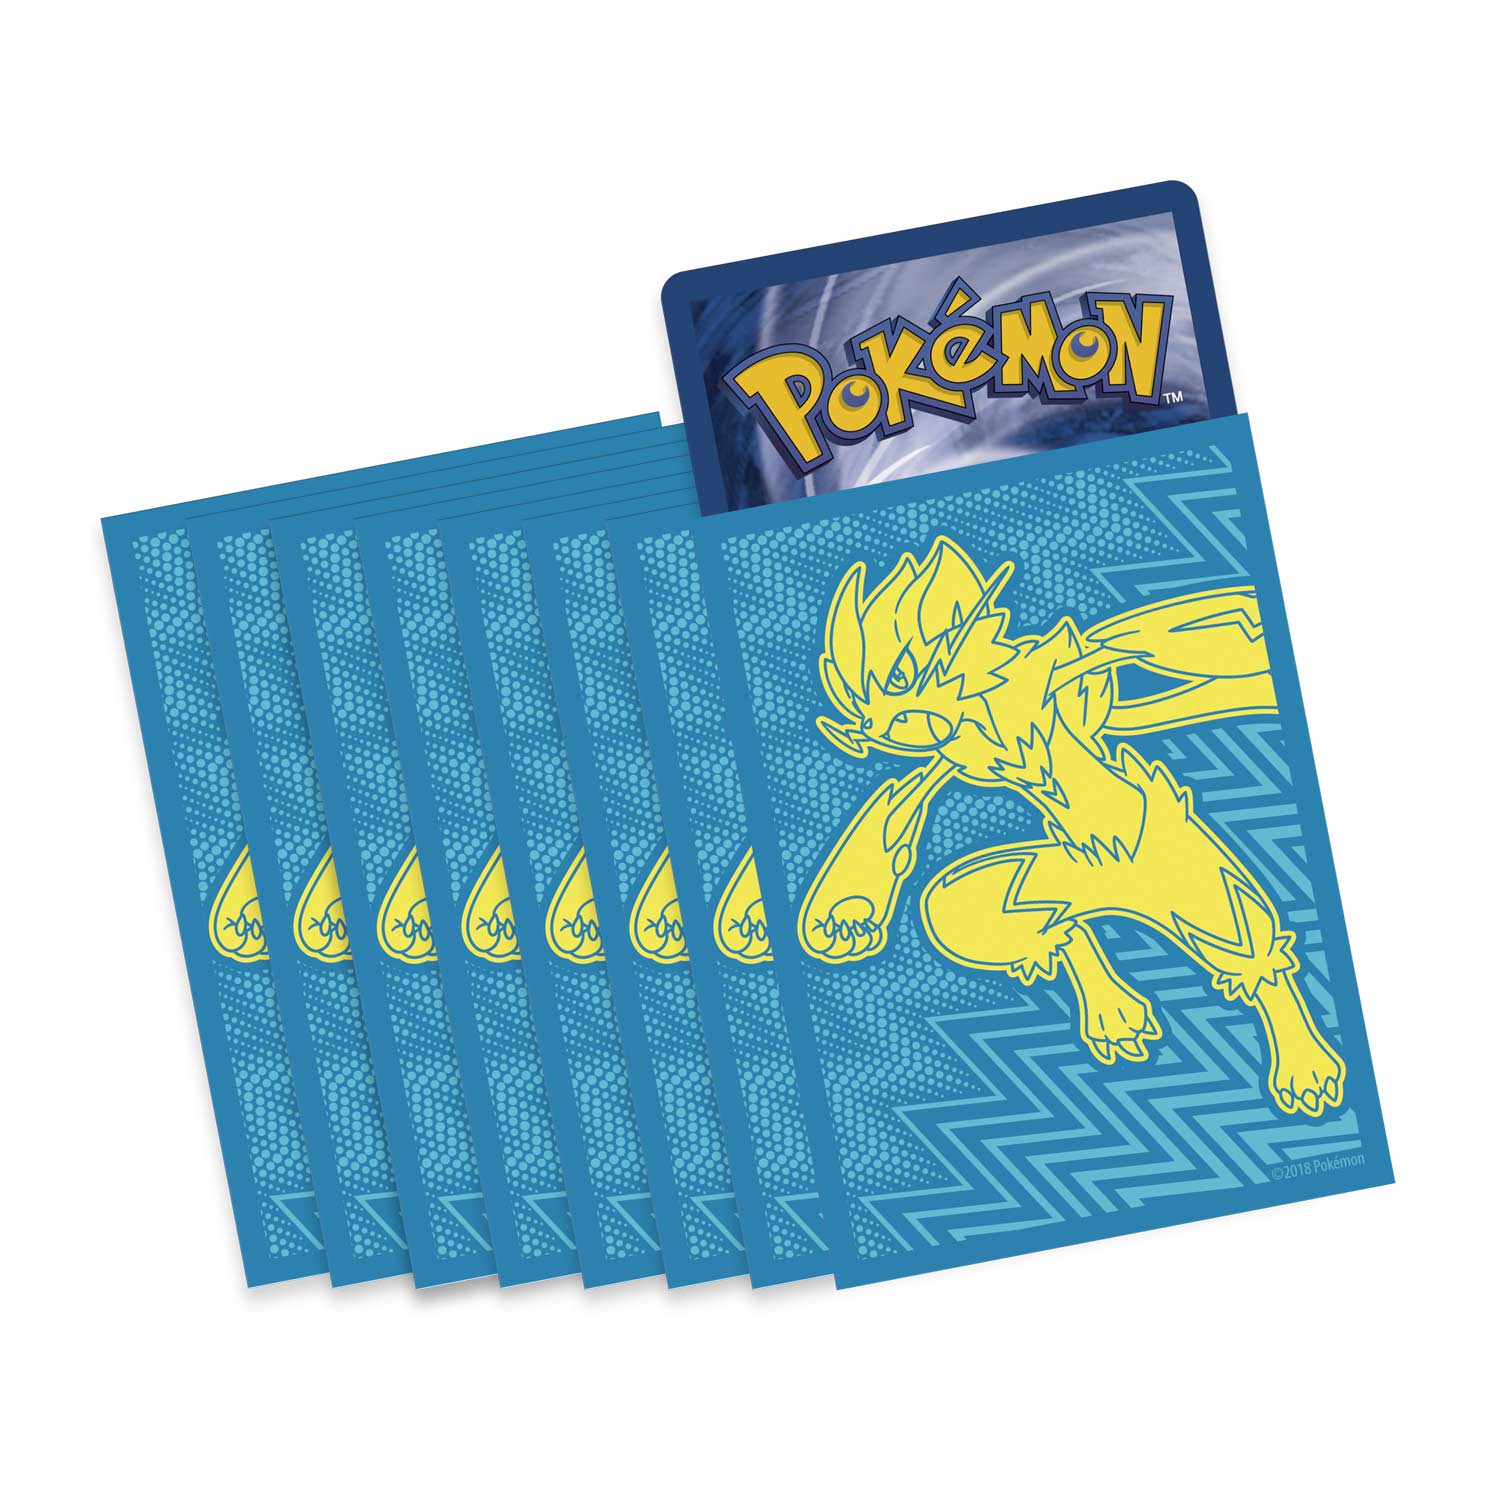 Sun & Moon: Lost Thunder - Elite Trainer Box | Total Play